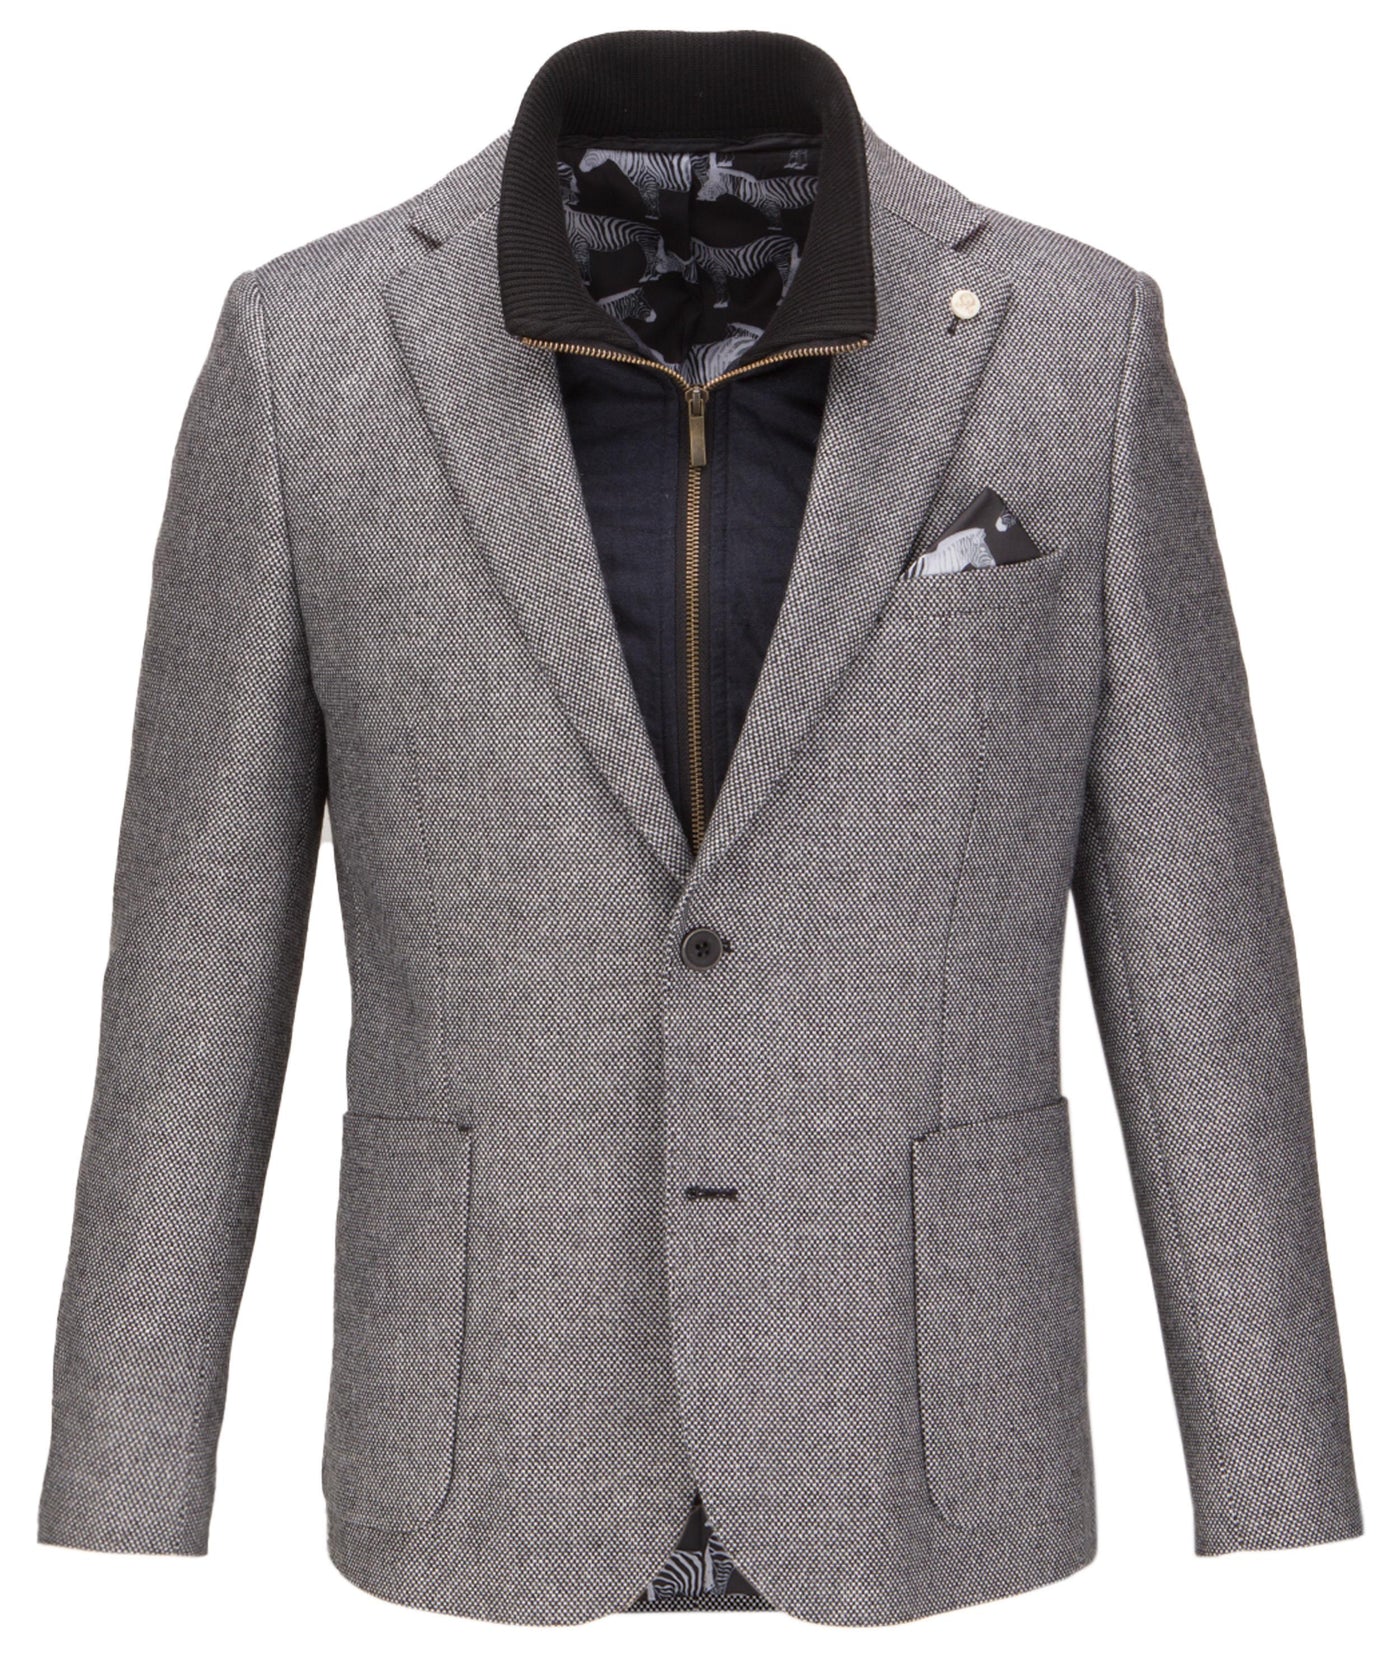 Brushed Tweed Checked Blazer with Gilet Look Insert